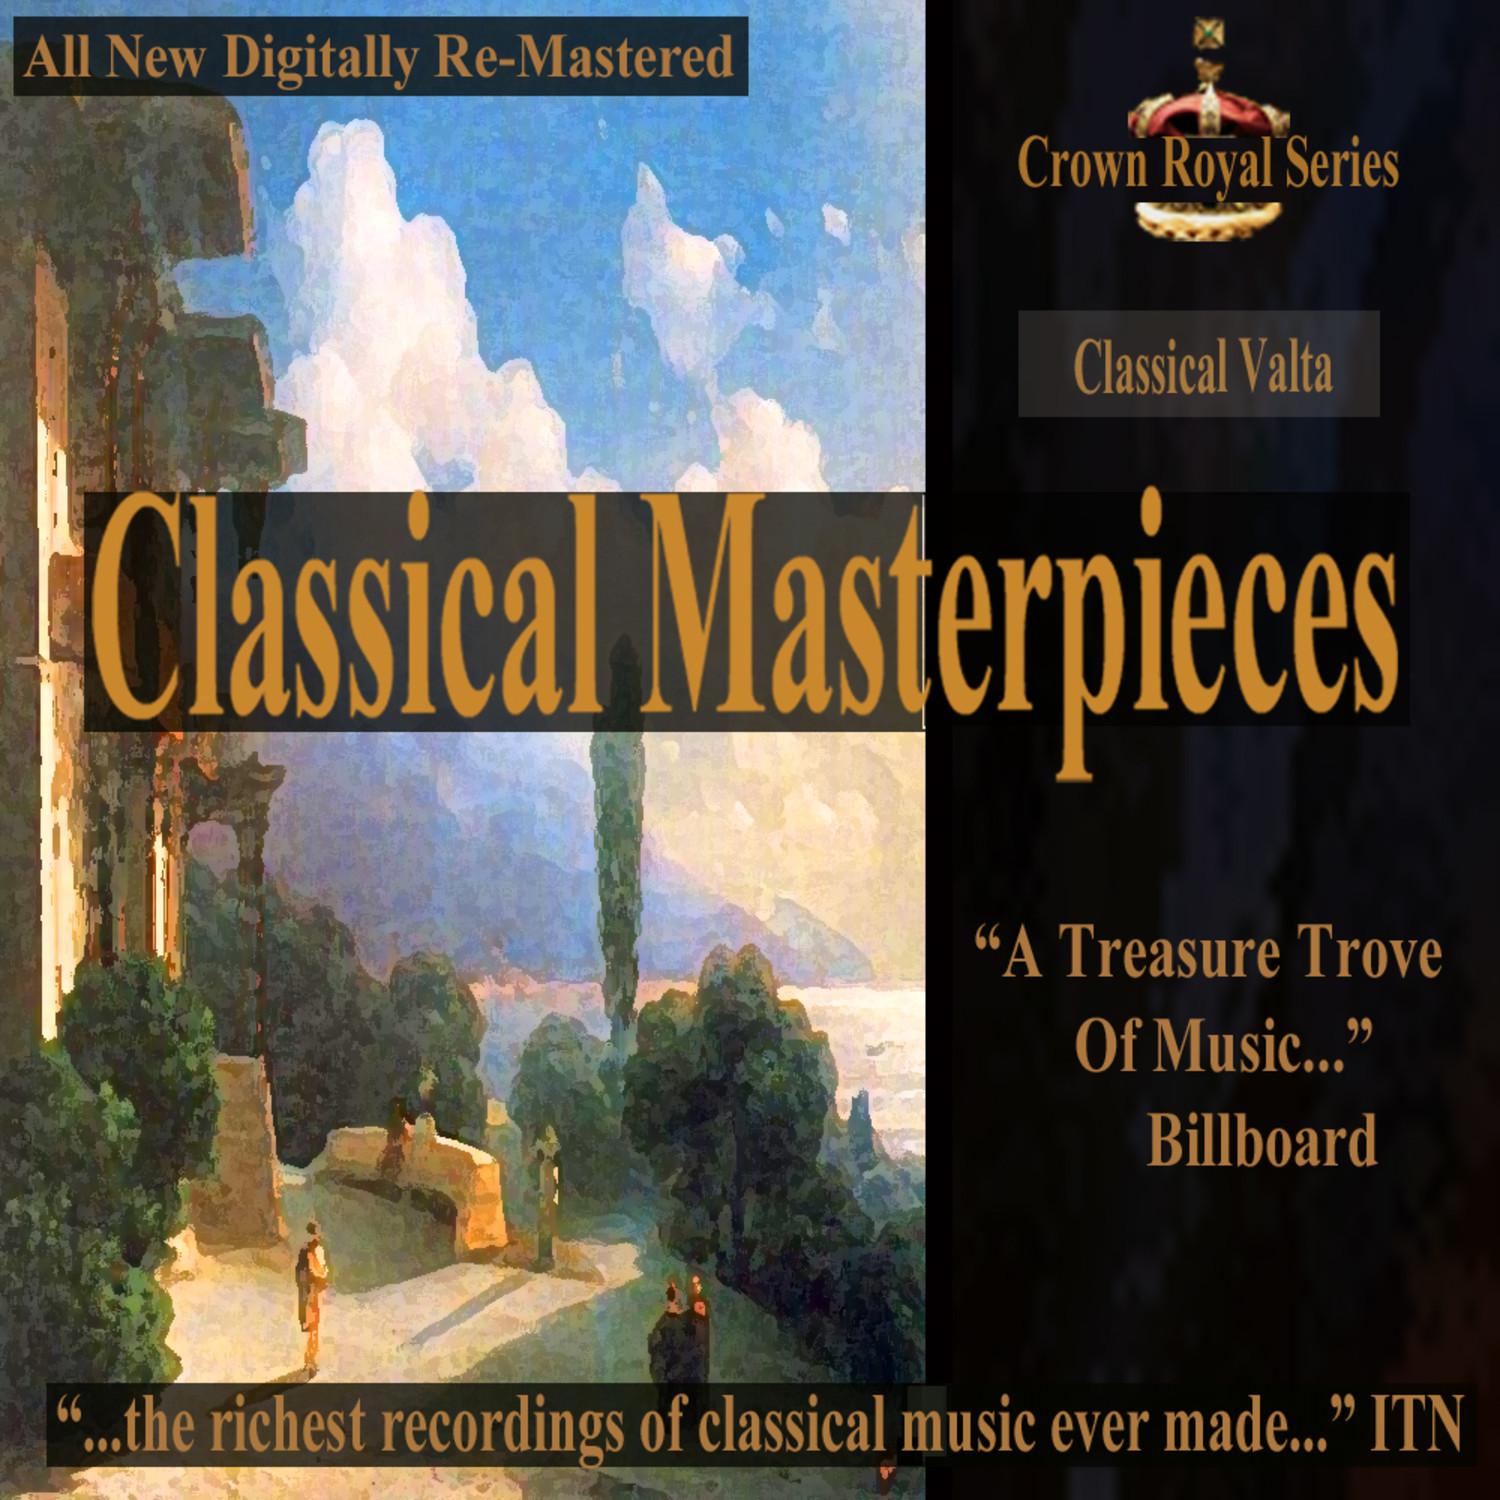 Concerto for Piano and Orchestra No. 3 in C Minor, Op. 37, II Largo